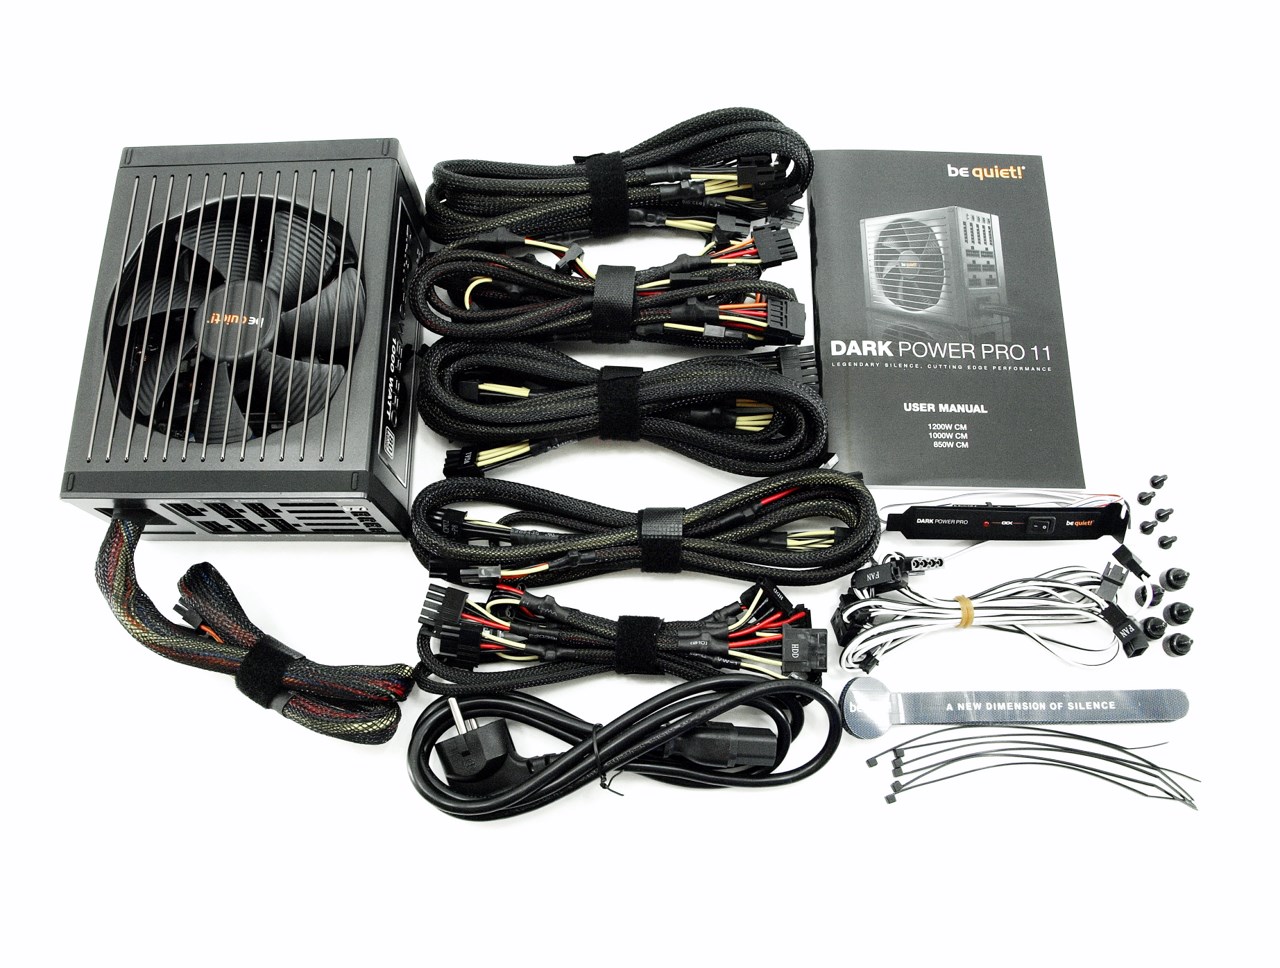 Be Quiet! Dark Power Pro 11 1000W Power Supply Unit Review